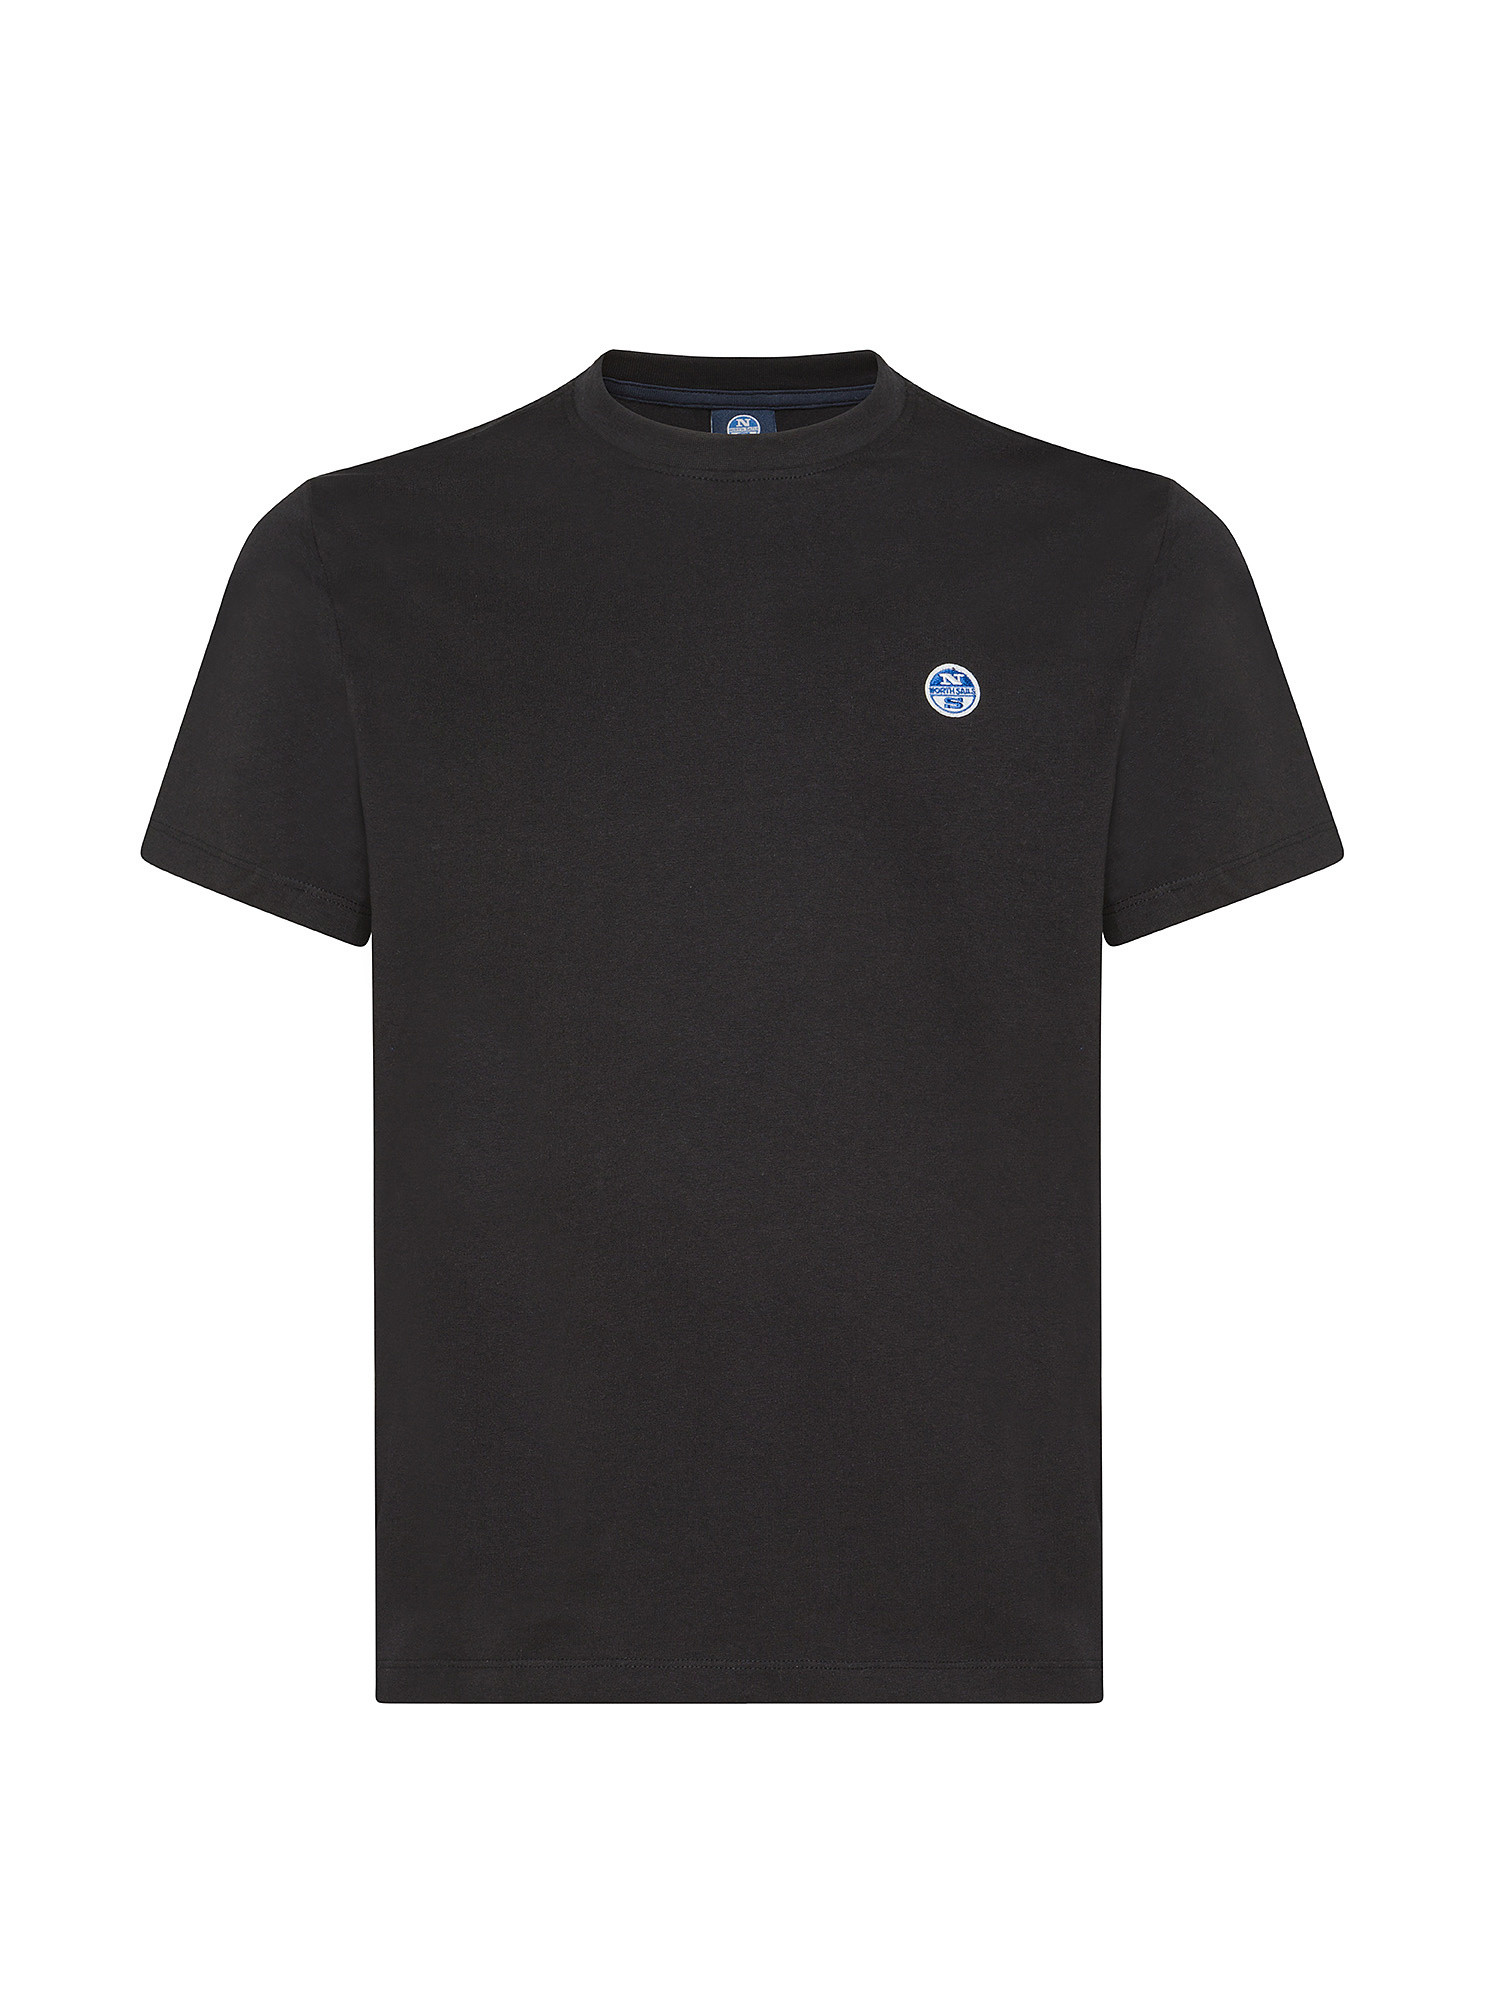 North Sails - Organic cotton jersey T-shirt with micrologo, Black, large image number 0